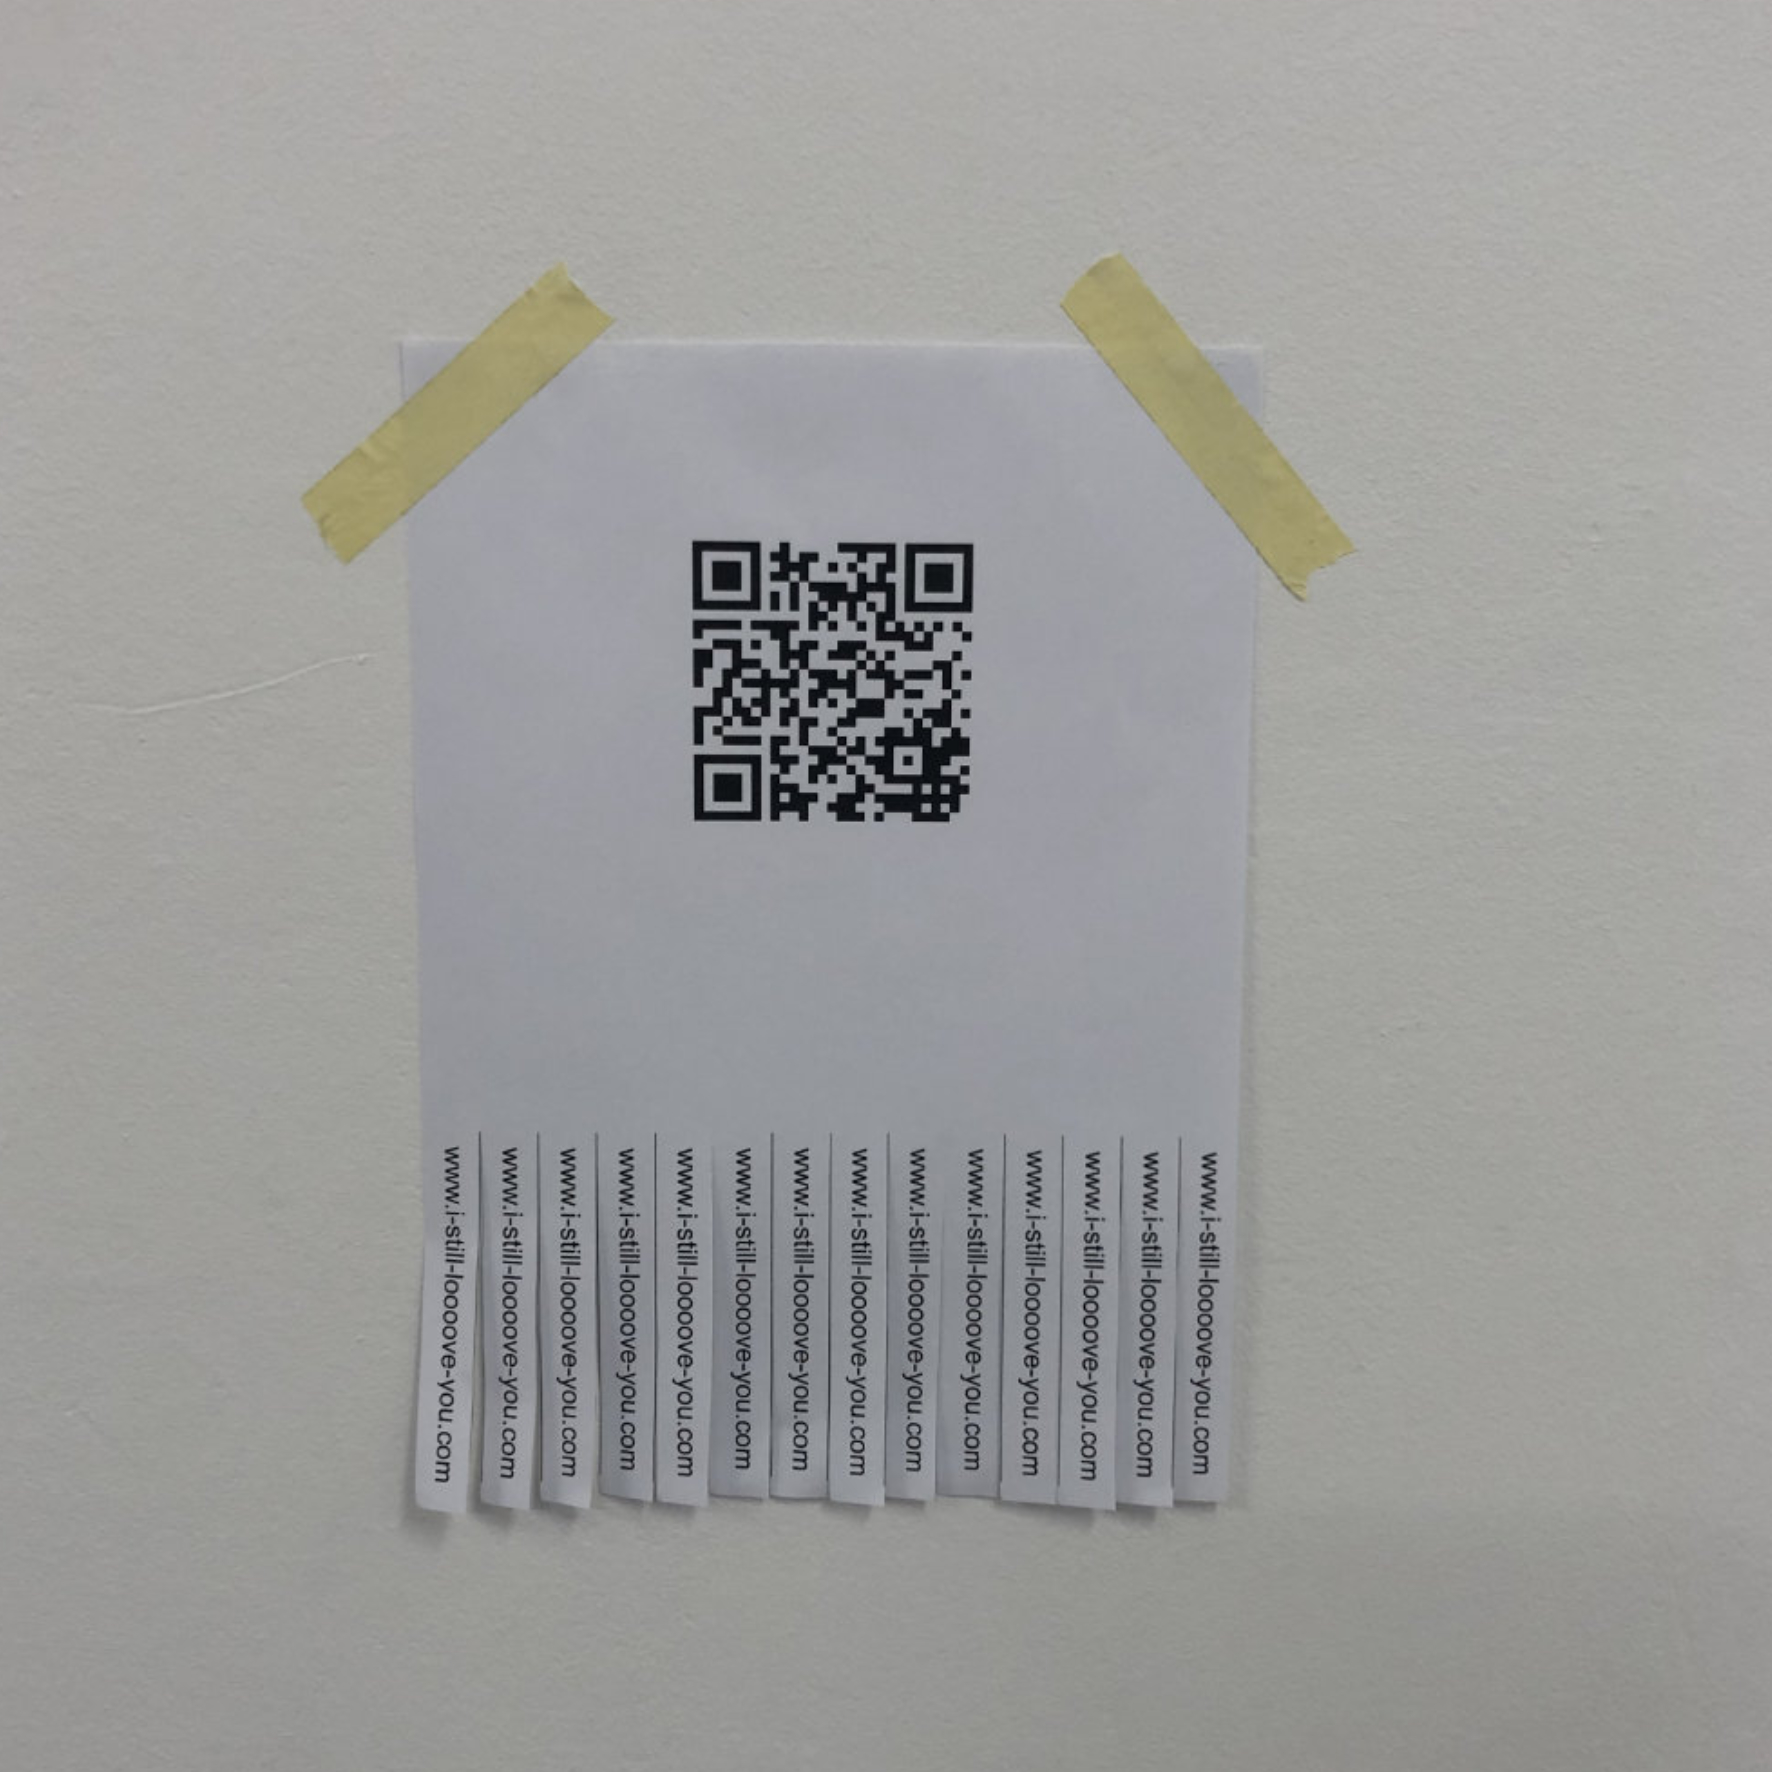 a A4 paper taped on the wall